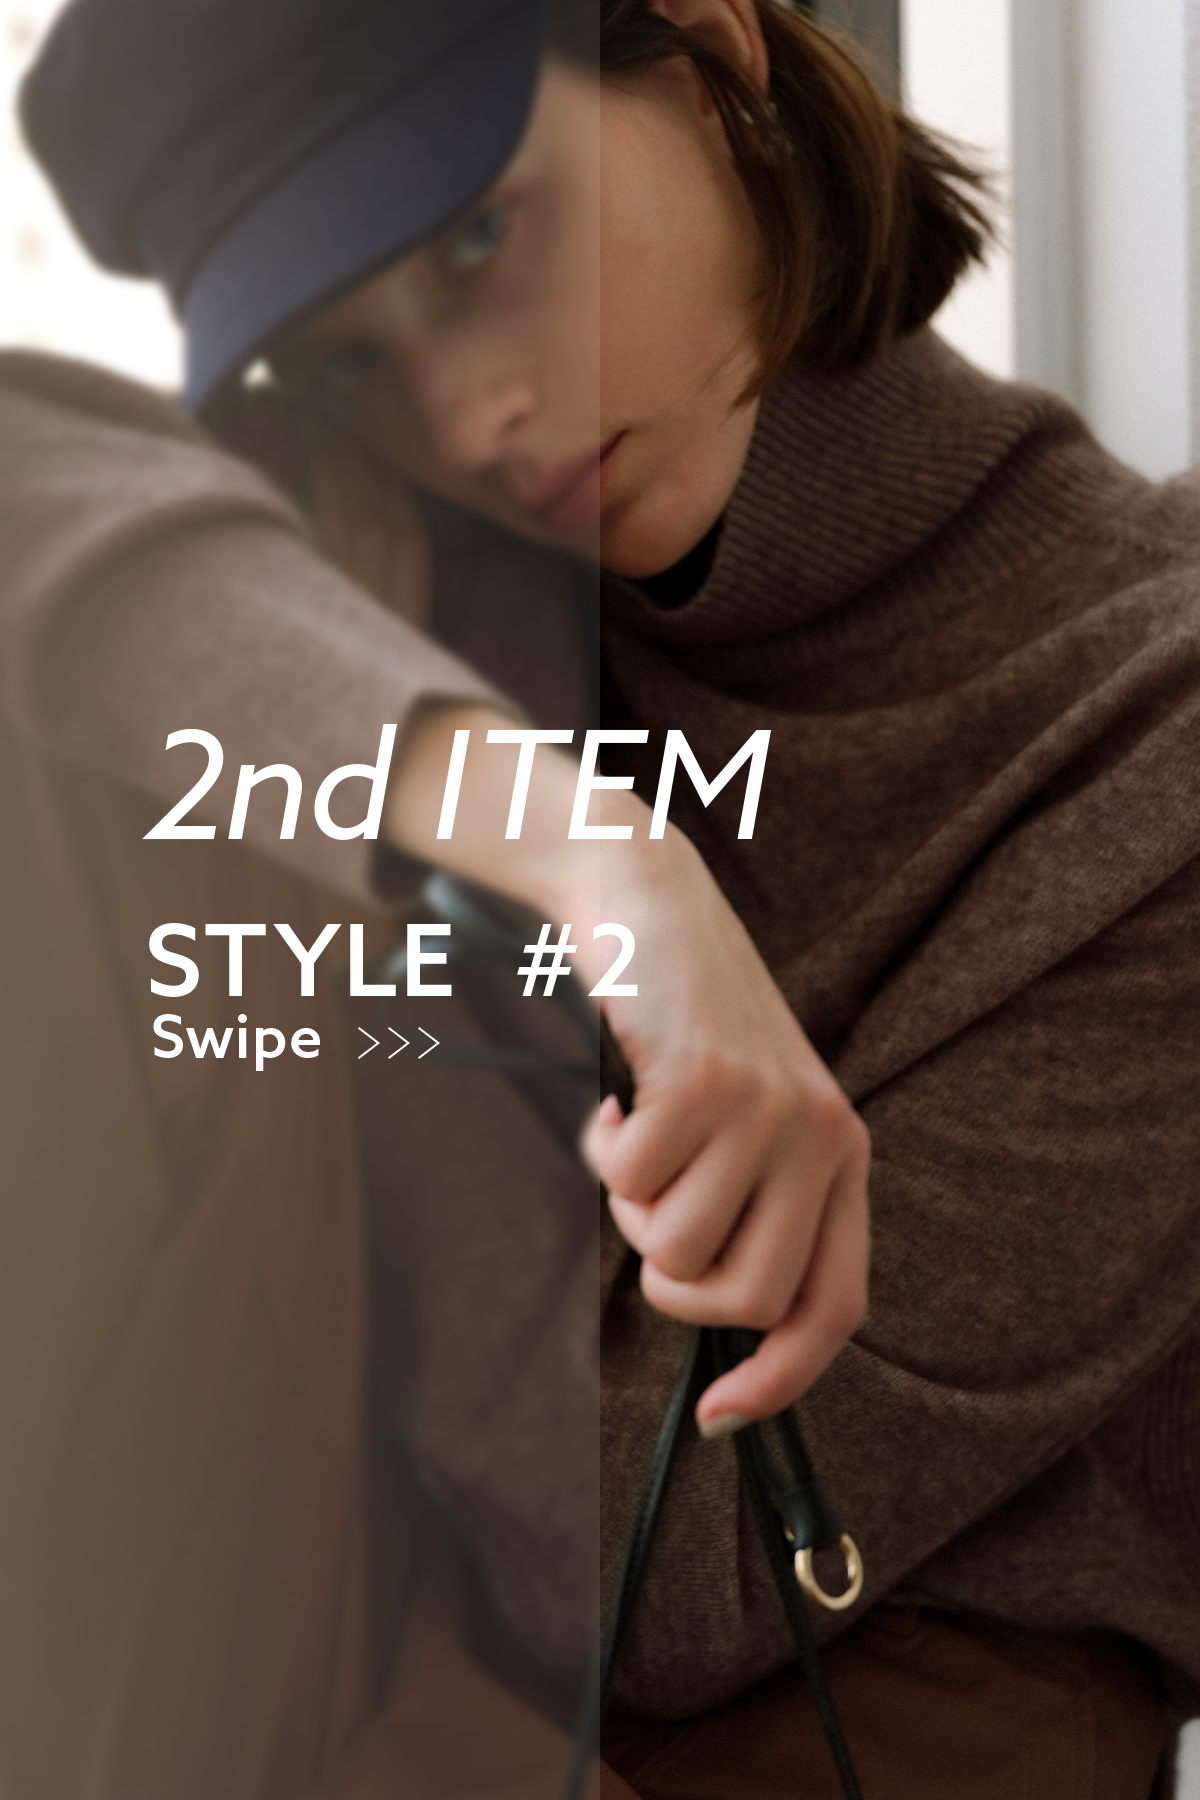 2nd ITEM STYLE #2